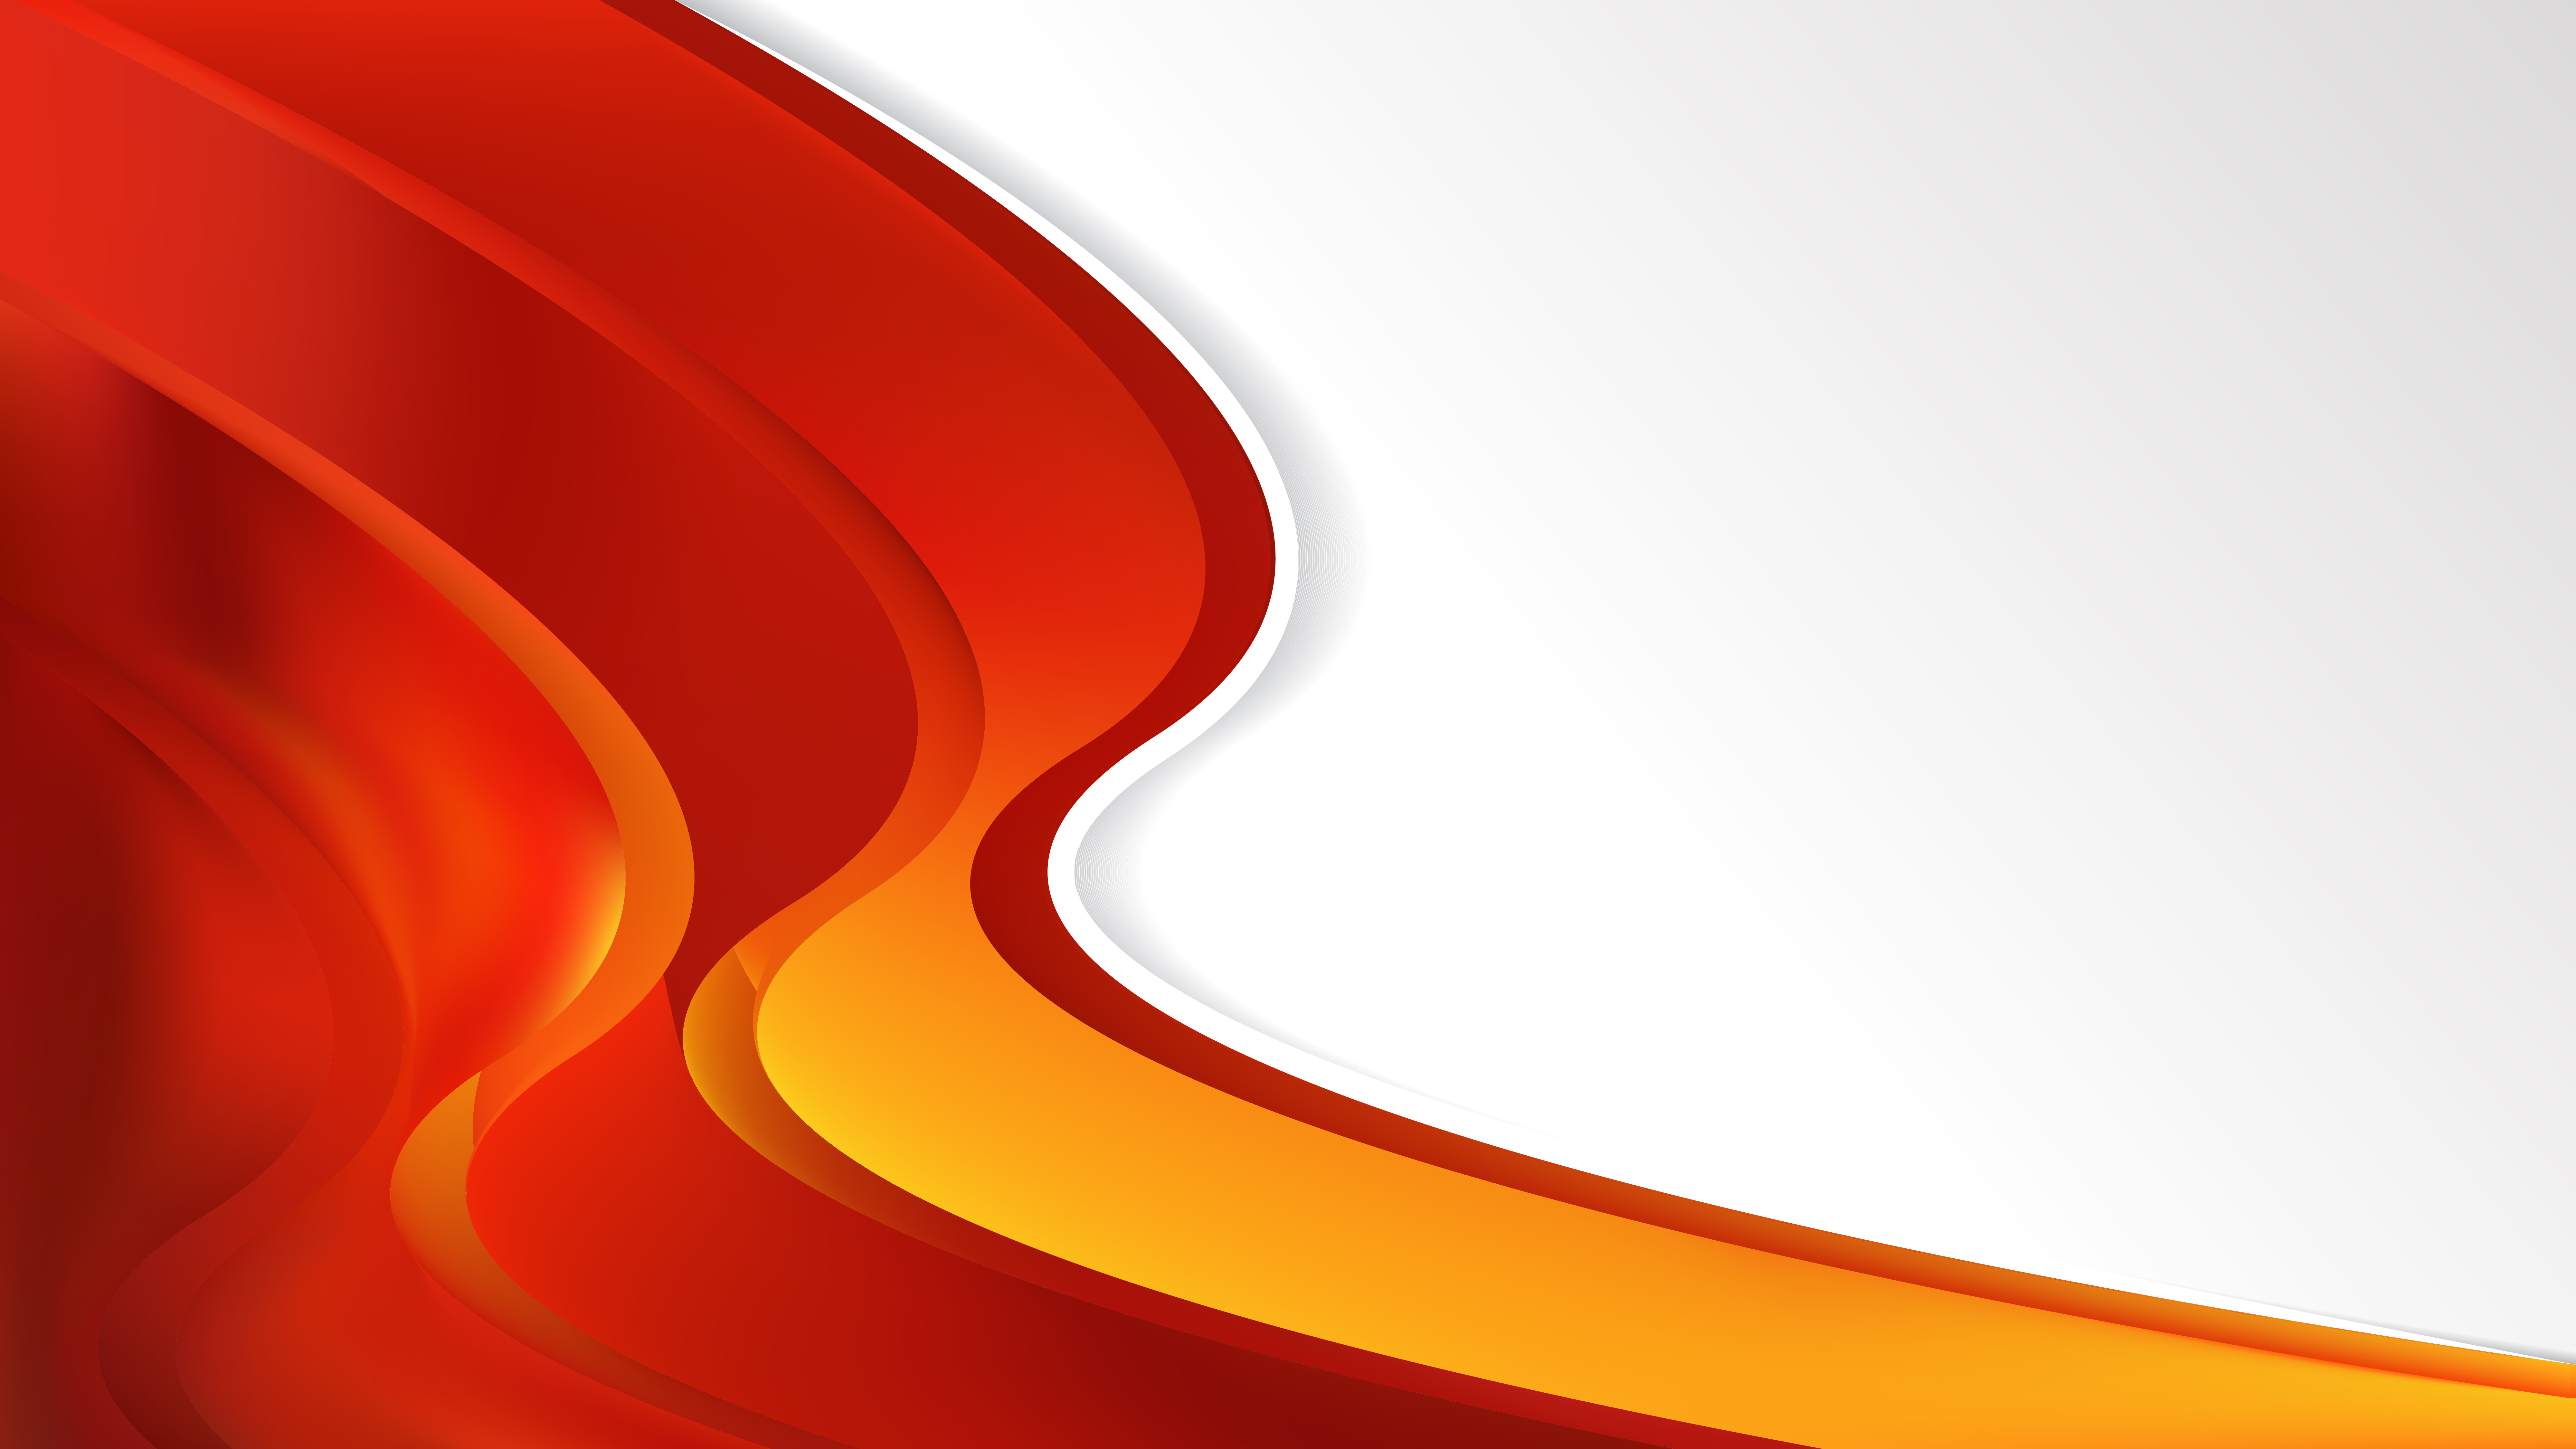 Free Red and Orange Wave Business Background Vector Art